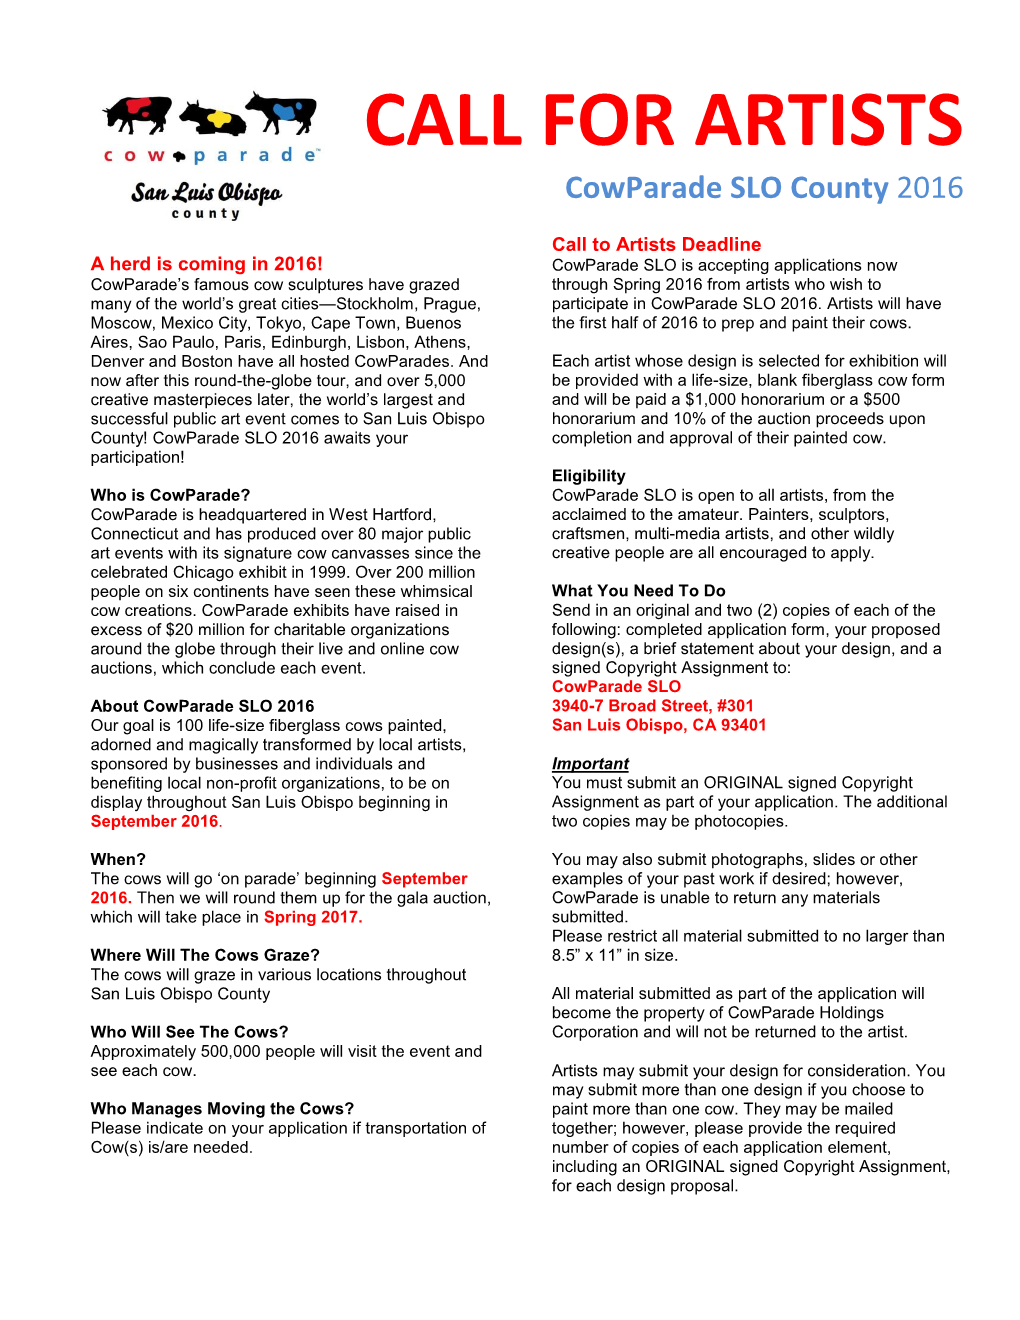 CALL for ARTISTS Cowparade SLO County 2016